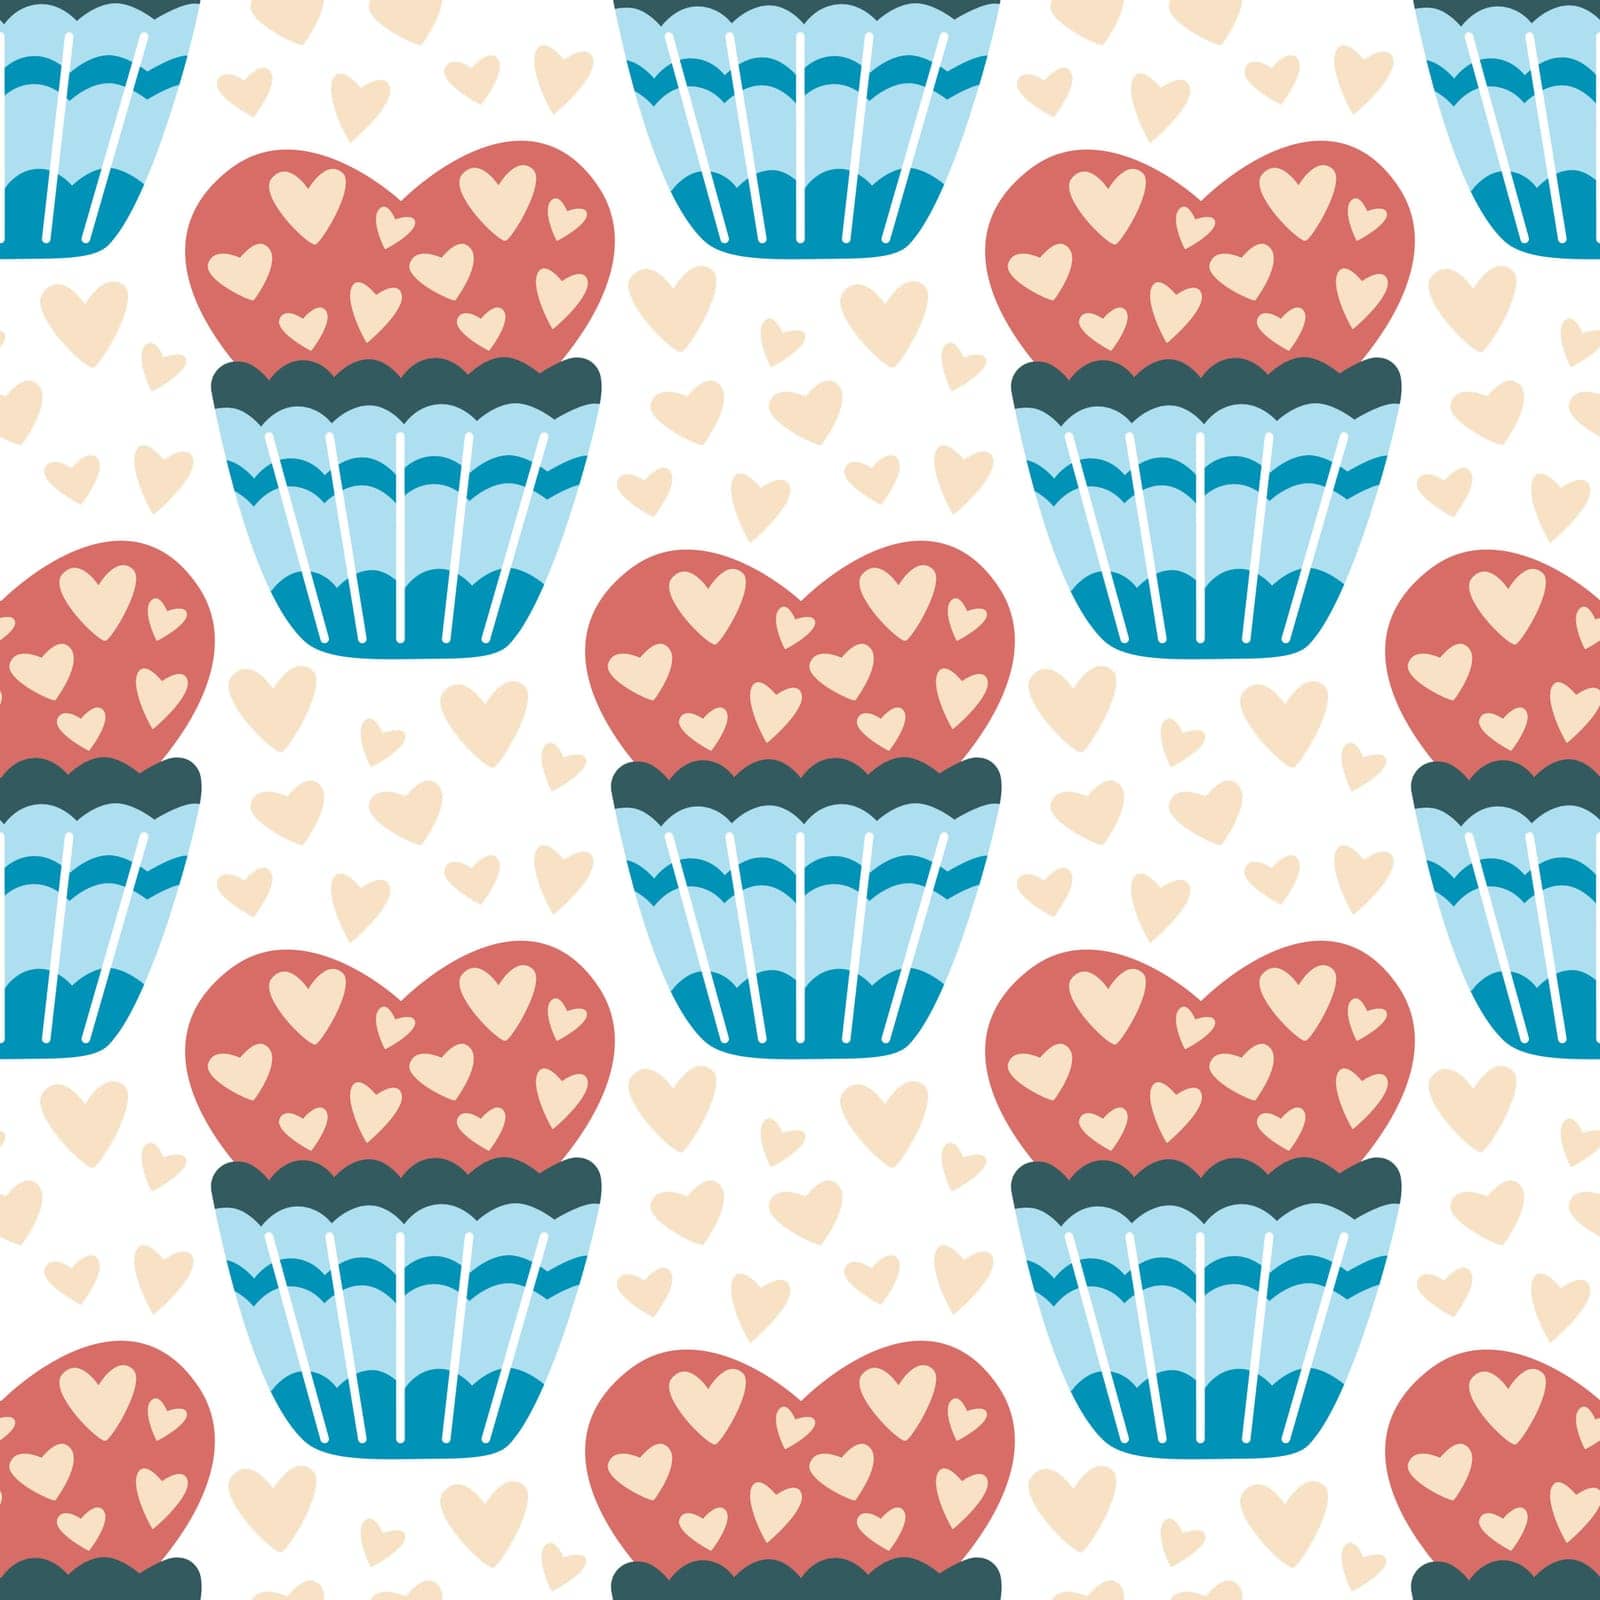 Sweet cakes with cream seamless pattern. Heart shaped cupcakes background. Romantic print with hearts and pastries, vector illustration